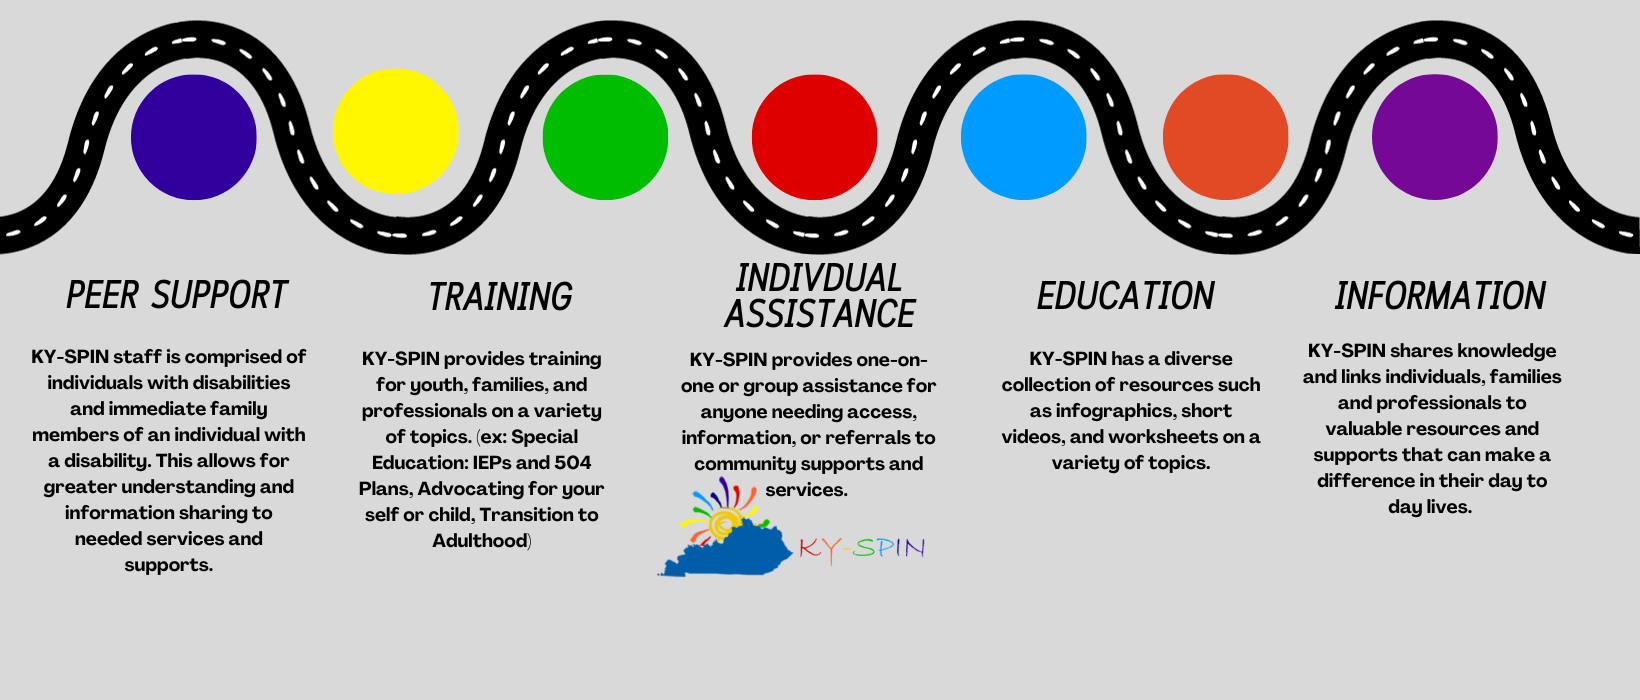 KY-SPIN provides Peer Support, Training, Individual Assistance, Education, and Information